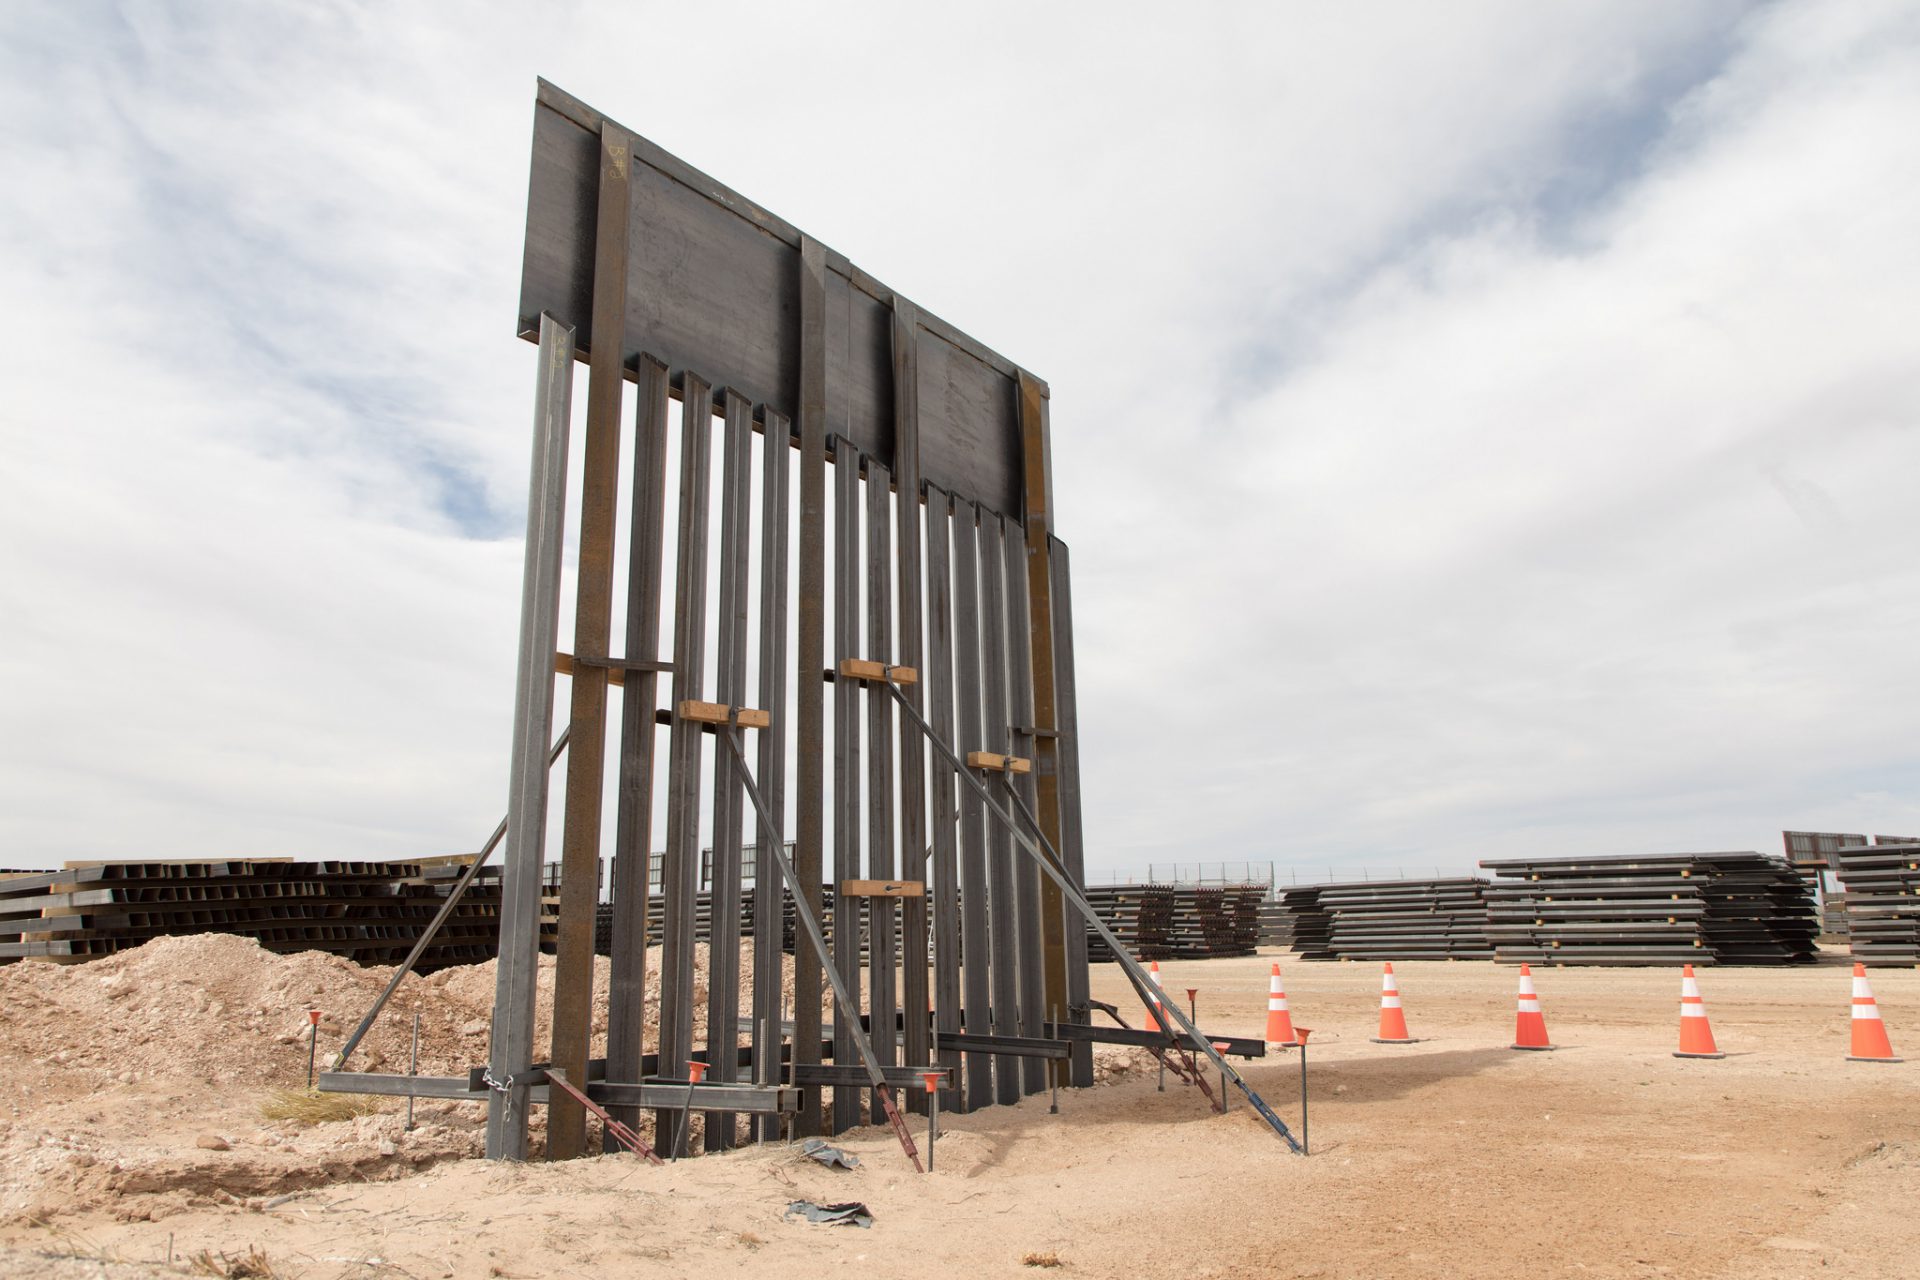 Construction Staging Area for the Santa Teresa Border Wall Replacement project